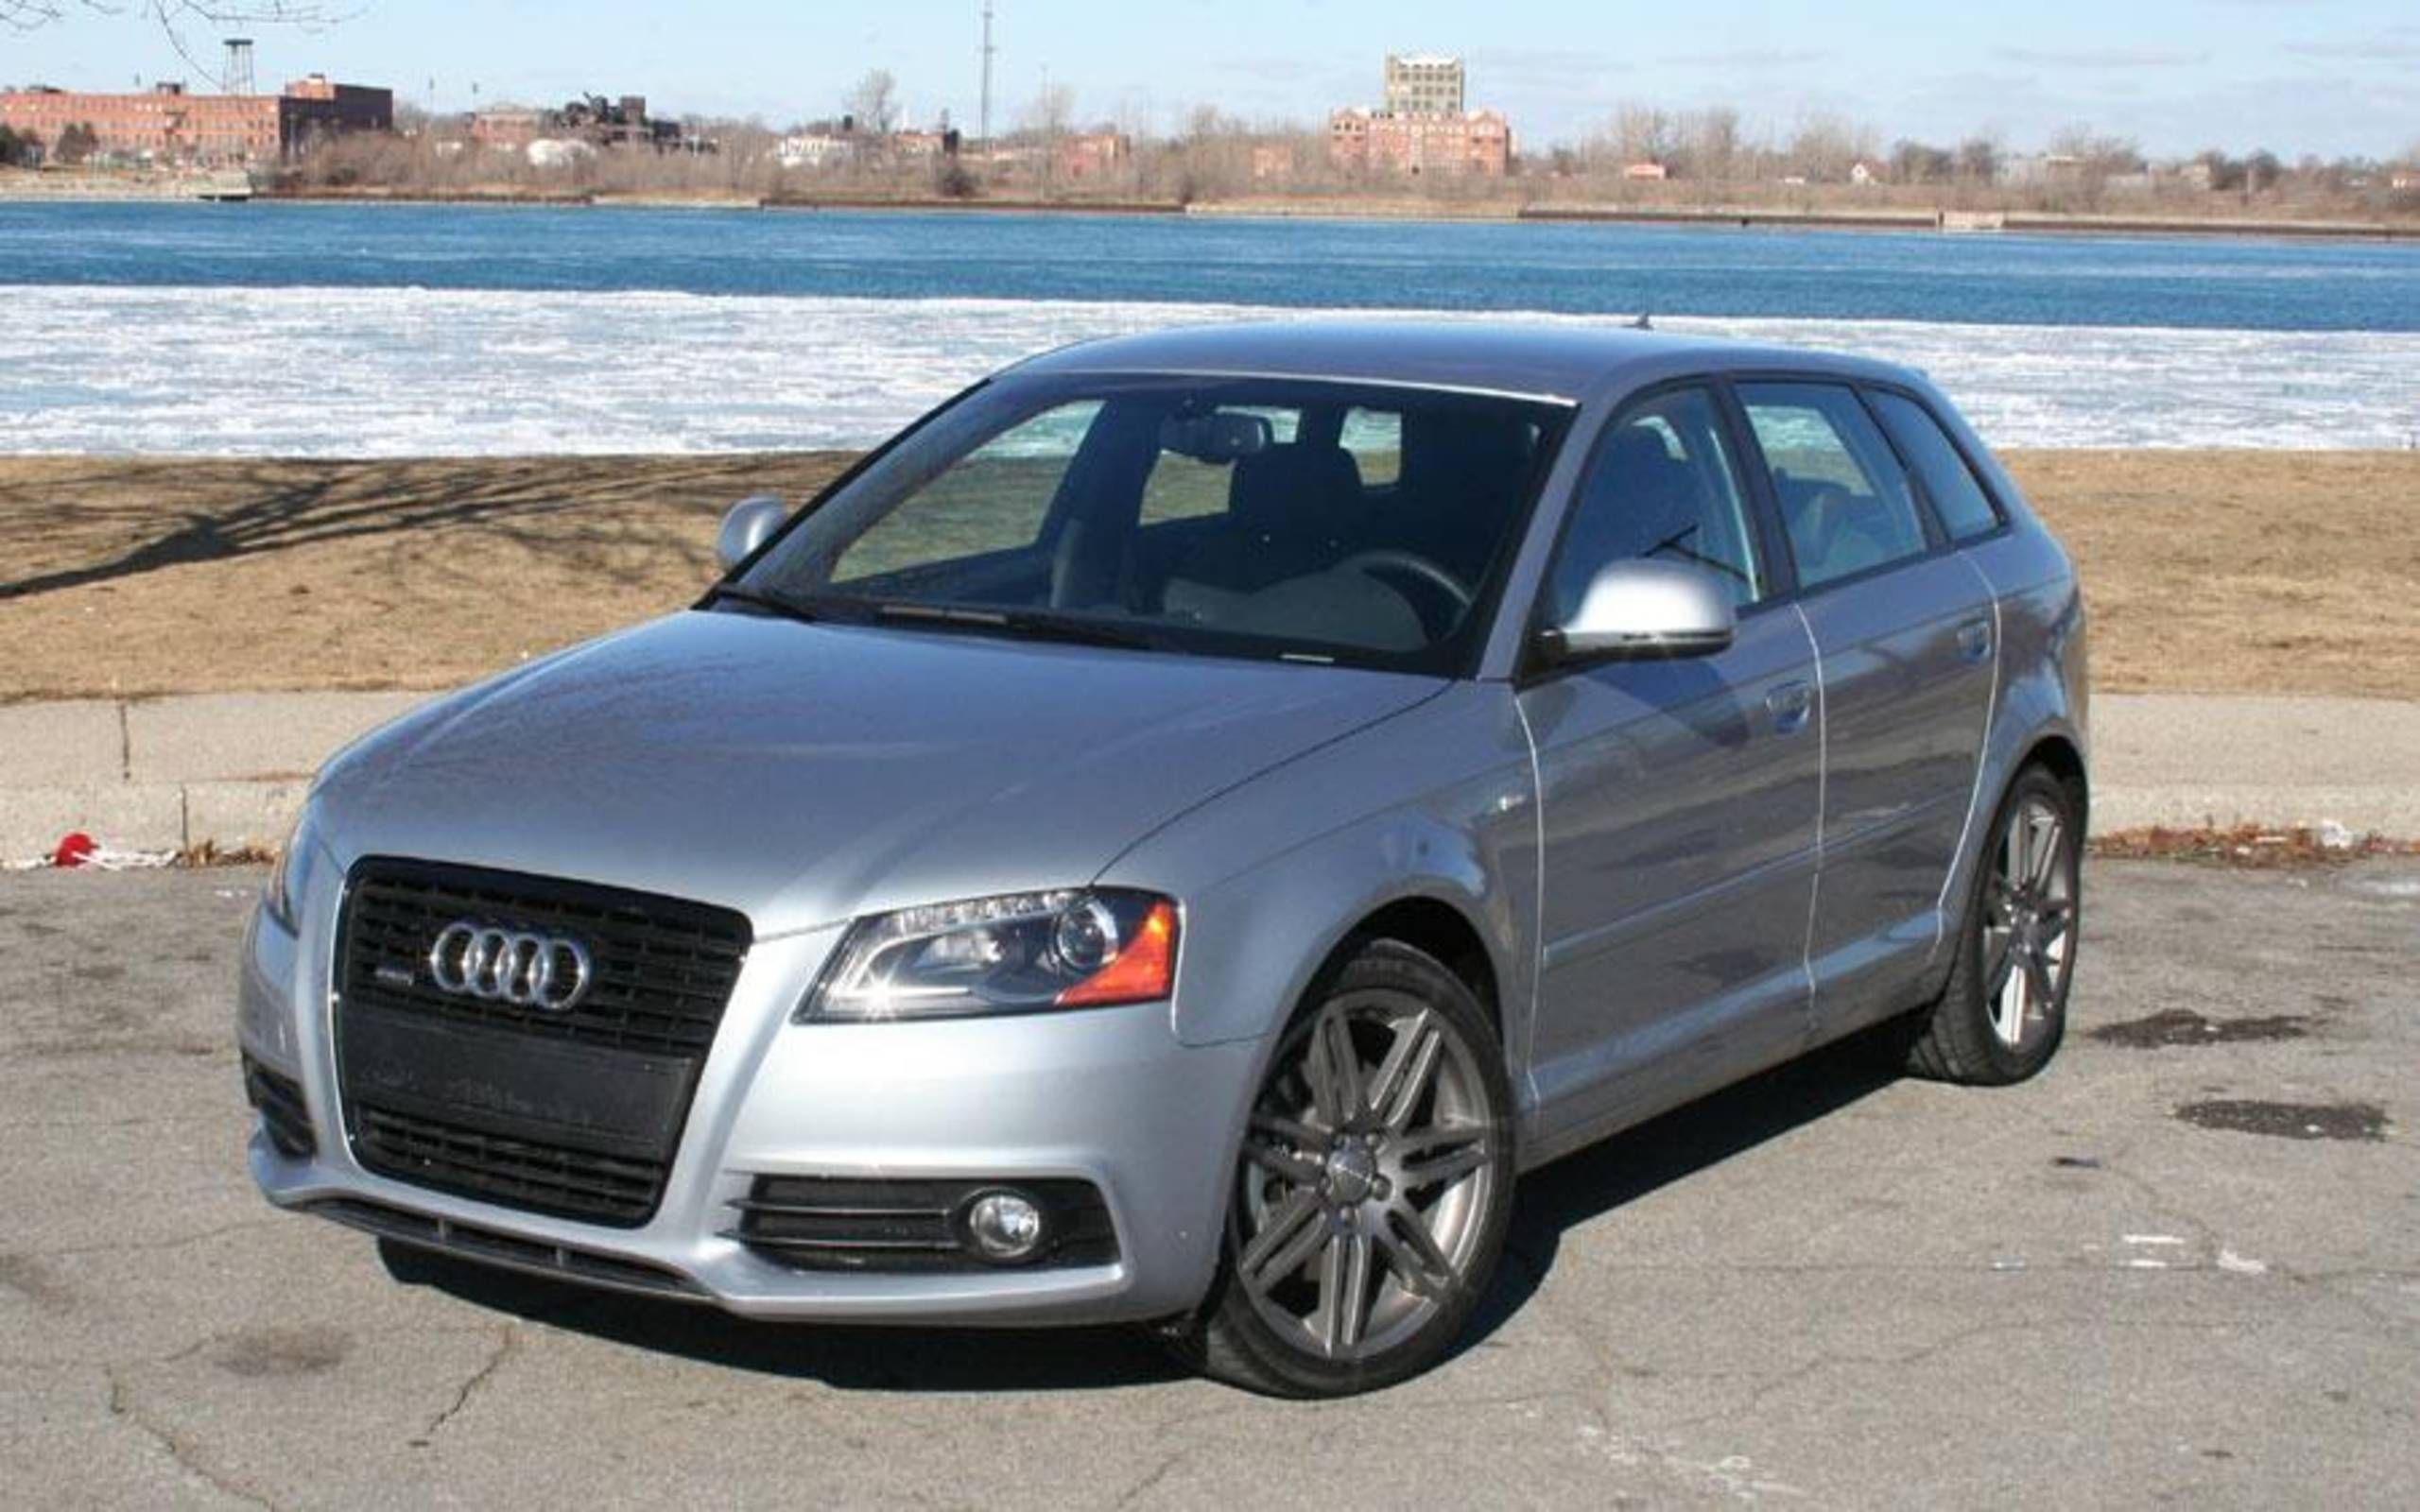 verdamping zingen Nationale volkstelling 2010 Audi A3 2.0T quattro, an AW Drivers Log